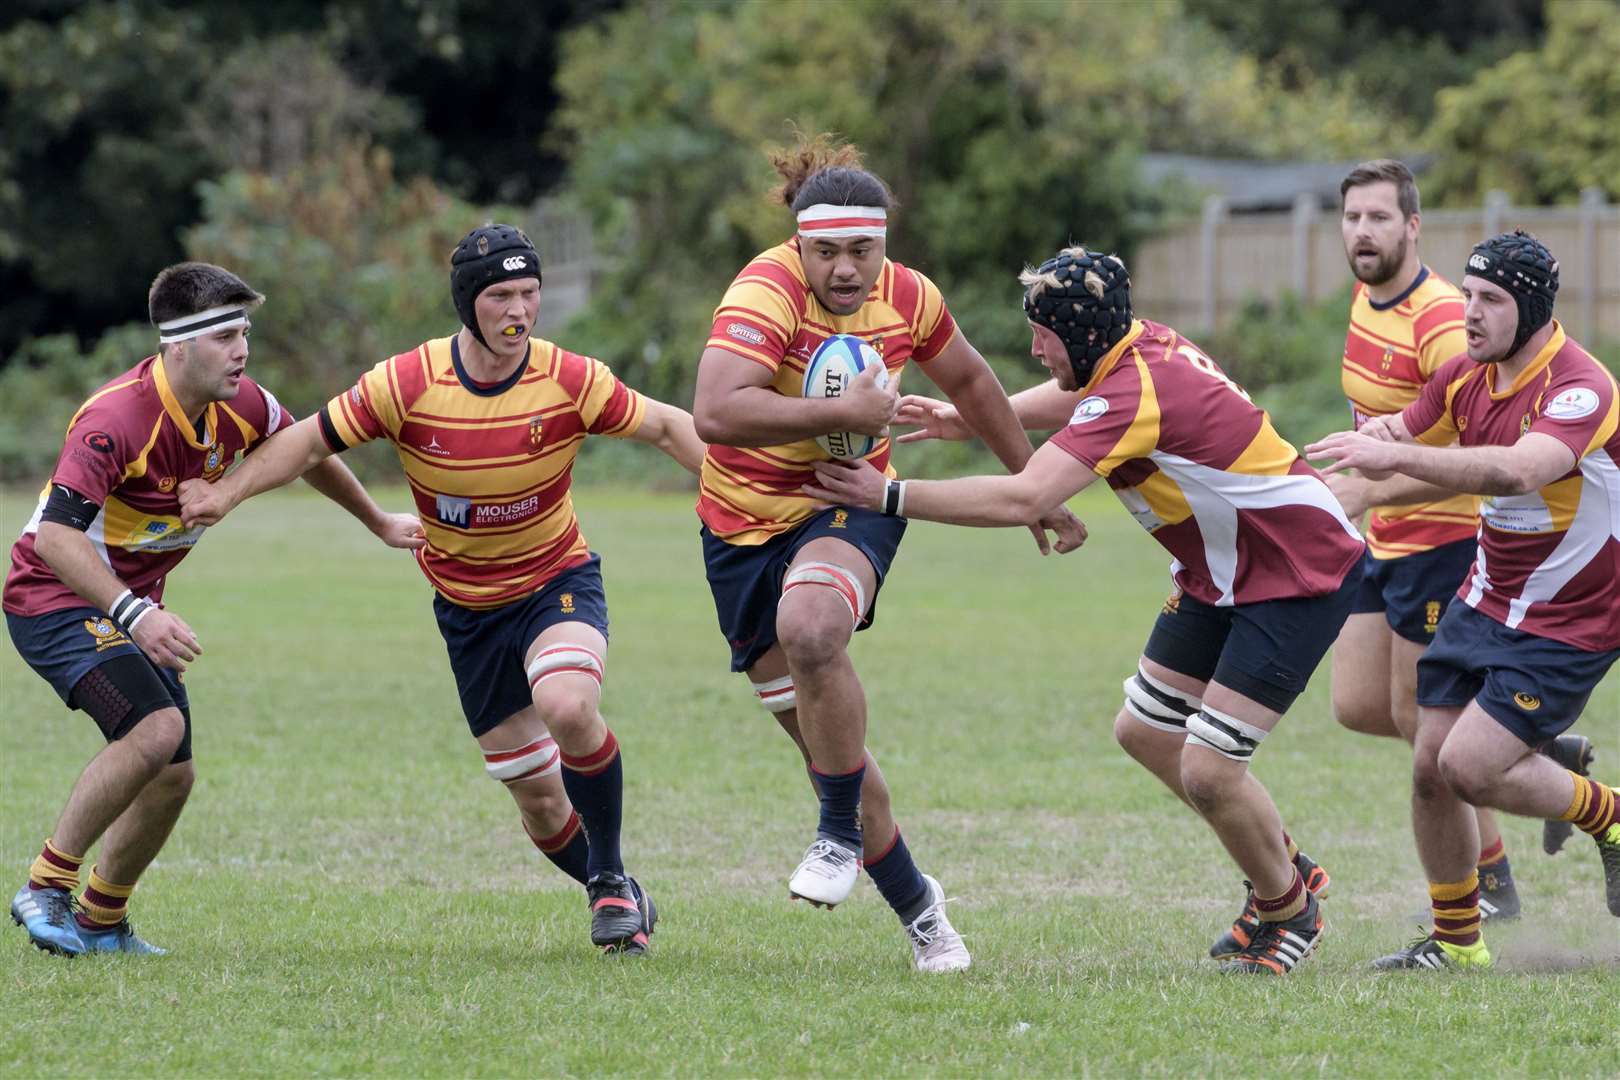 Dartfordians (burgundy) vs Medway (yellow/red hoops), rugby action from the Memoprial Ground, Bourne Road, Bexley. Picture: Andy Payton